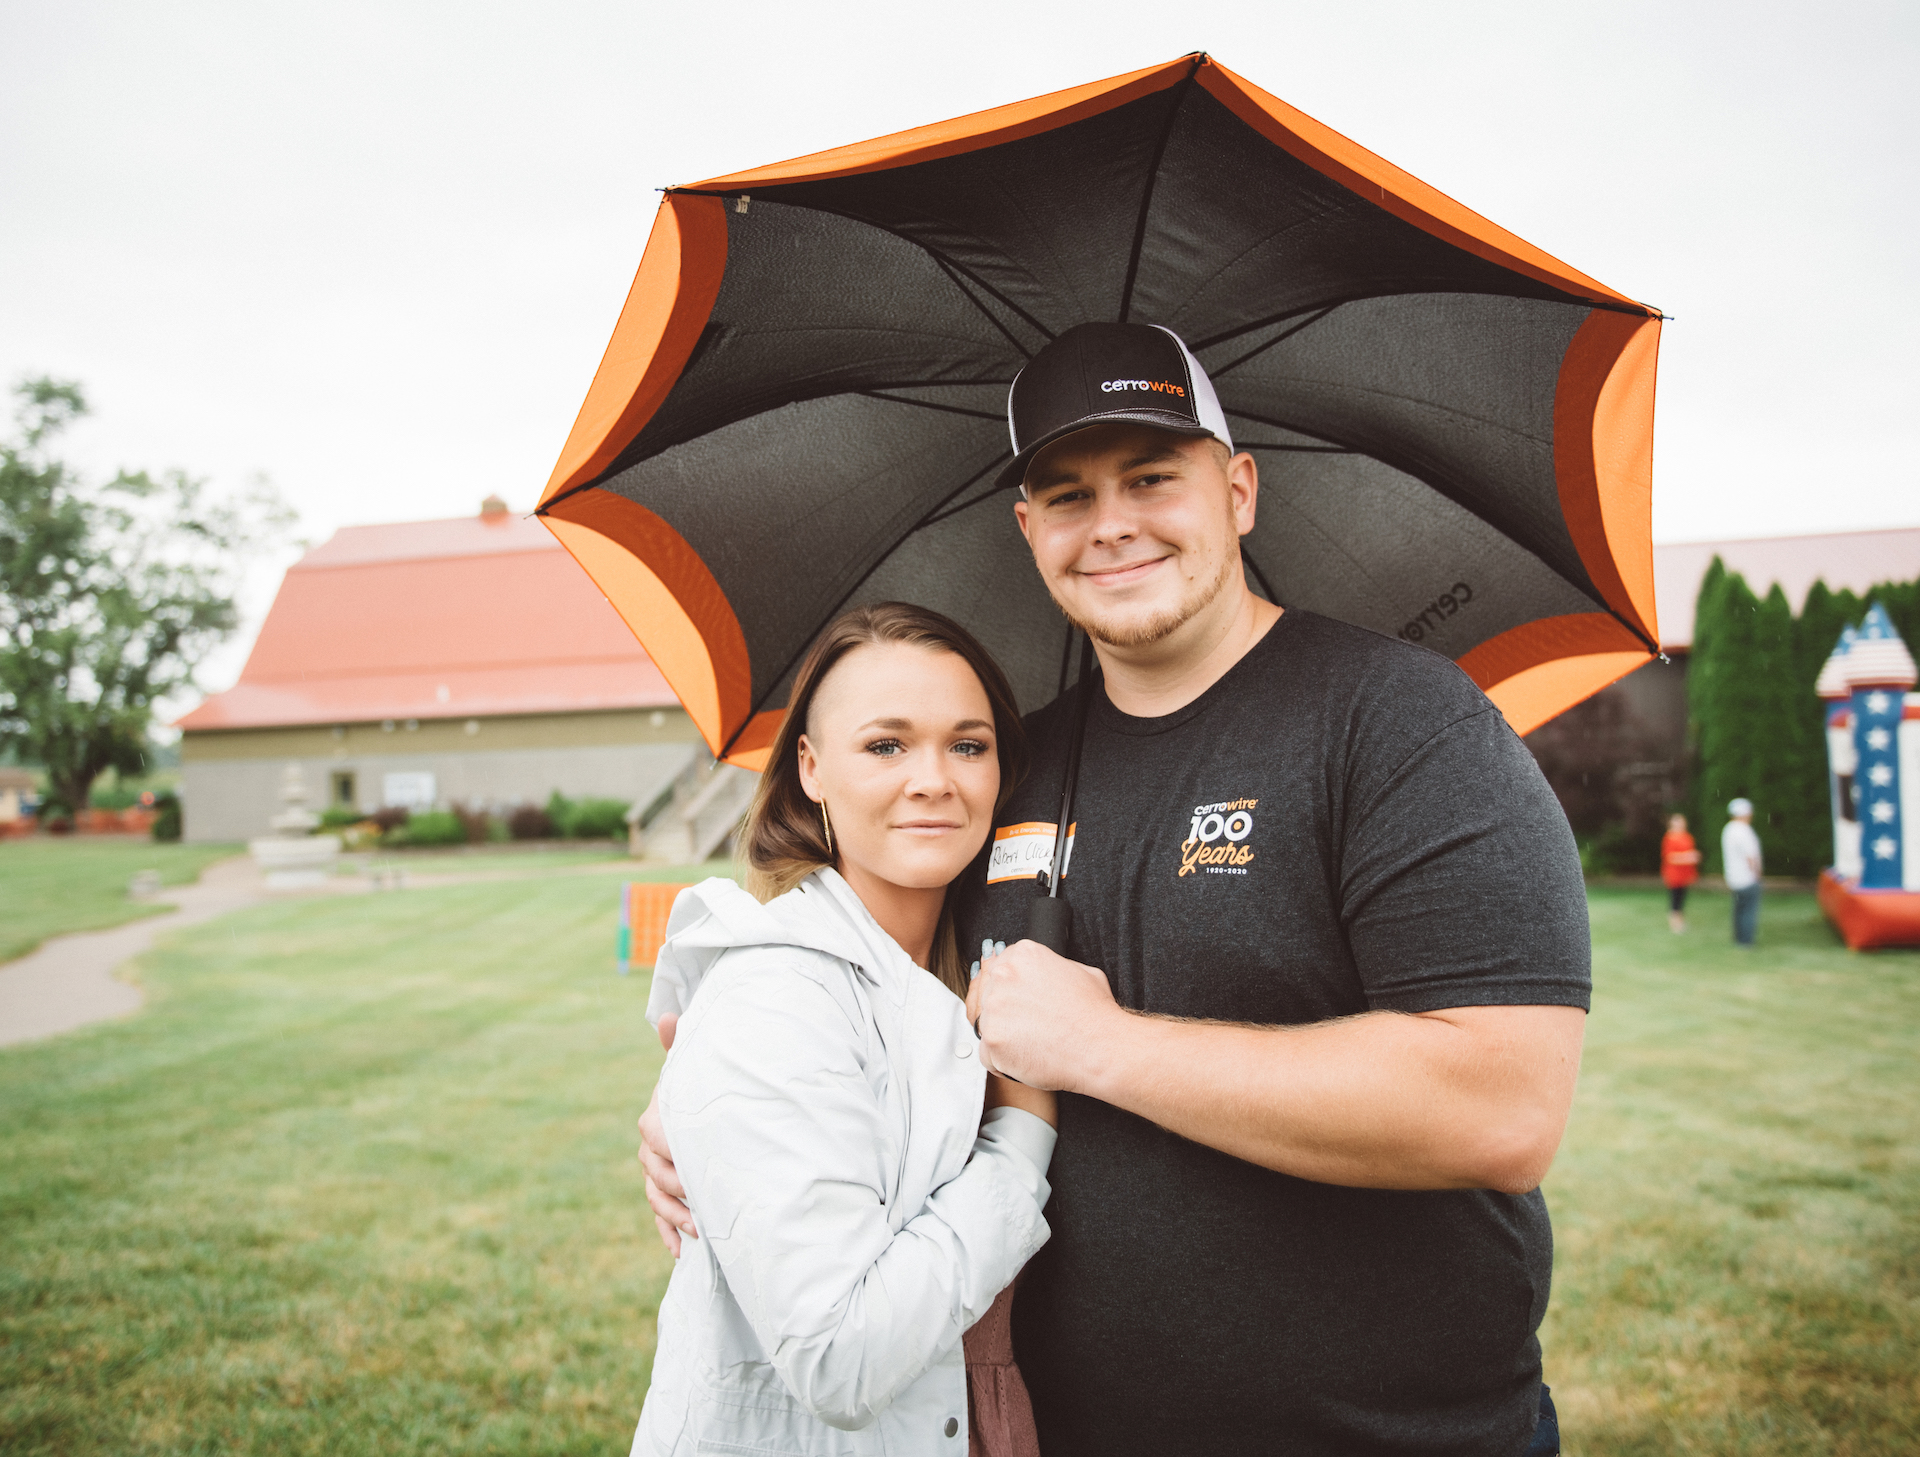 Couple stays dry during 100-Year Anniversary Celebration at Chateau de Pique in Indiana.